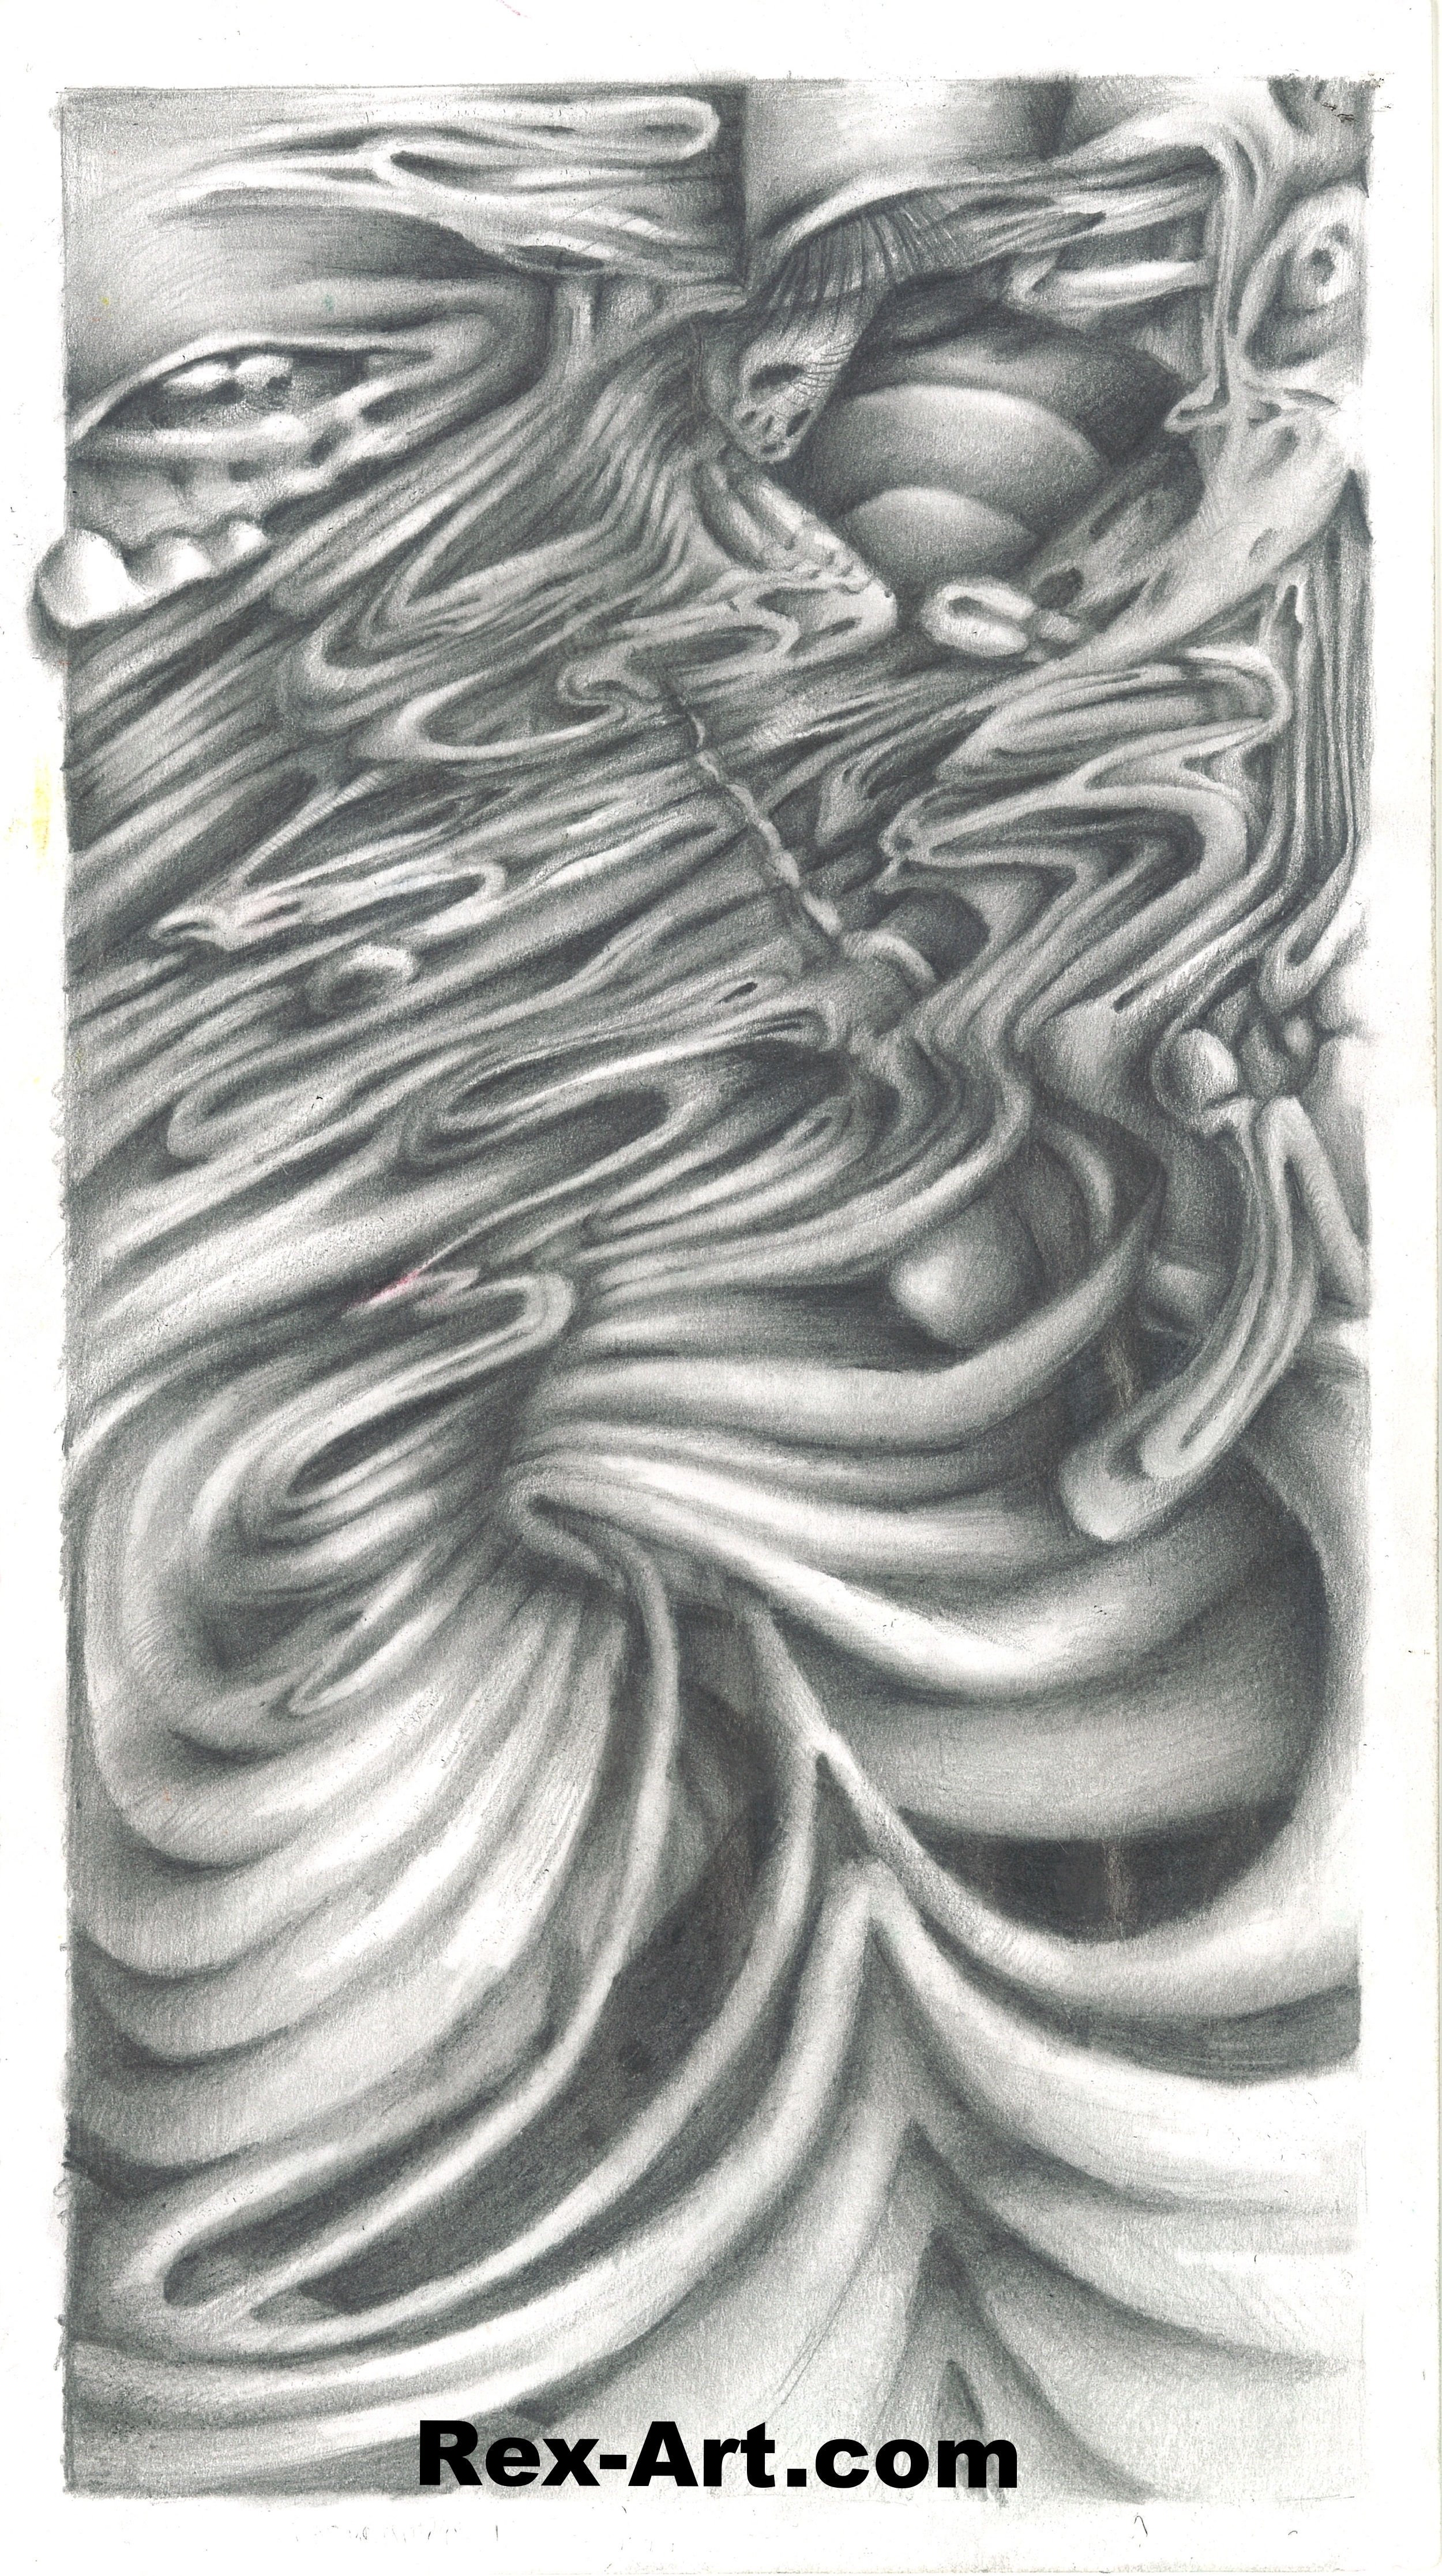   Untitled , graphite on paper, 5” x 8” 